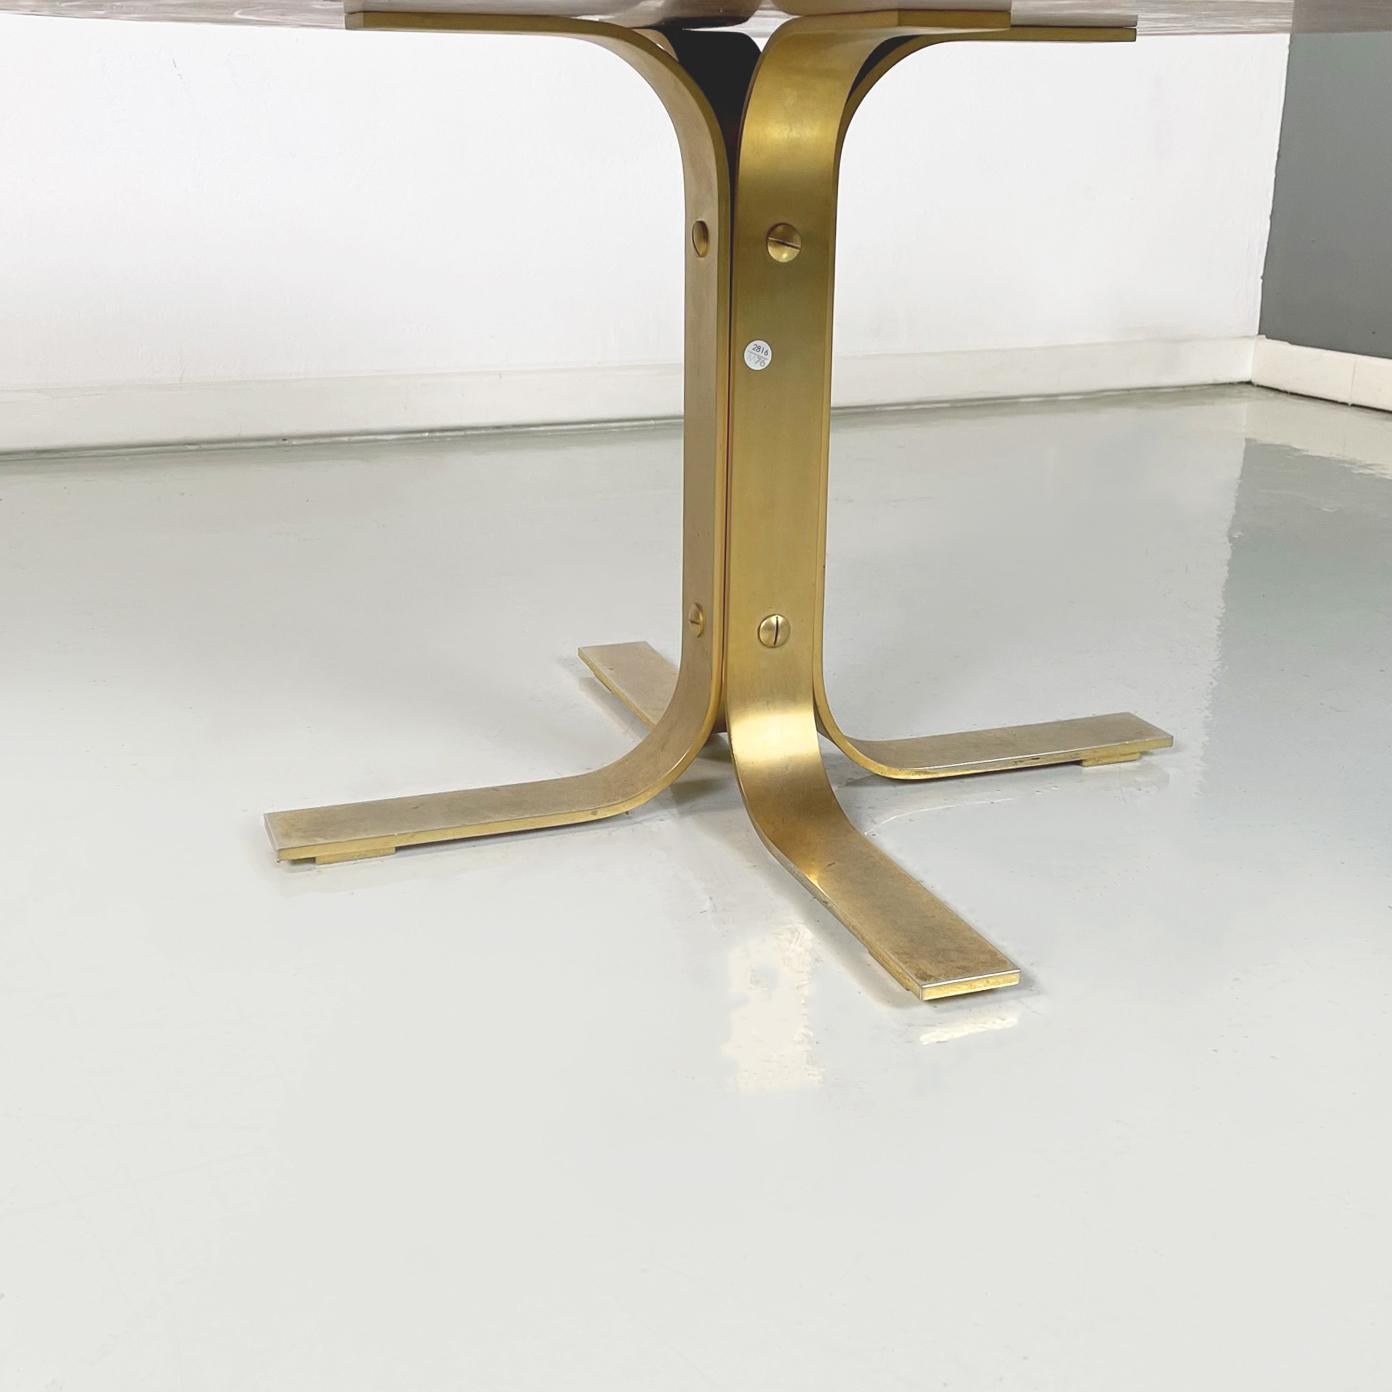 Italian Modern Coffee Table in Wood, Parchment and Brass by Aldo Tura, 1960s For Sale 5